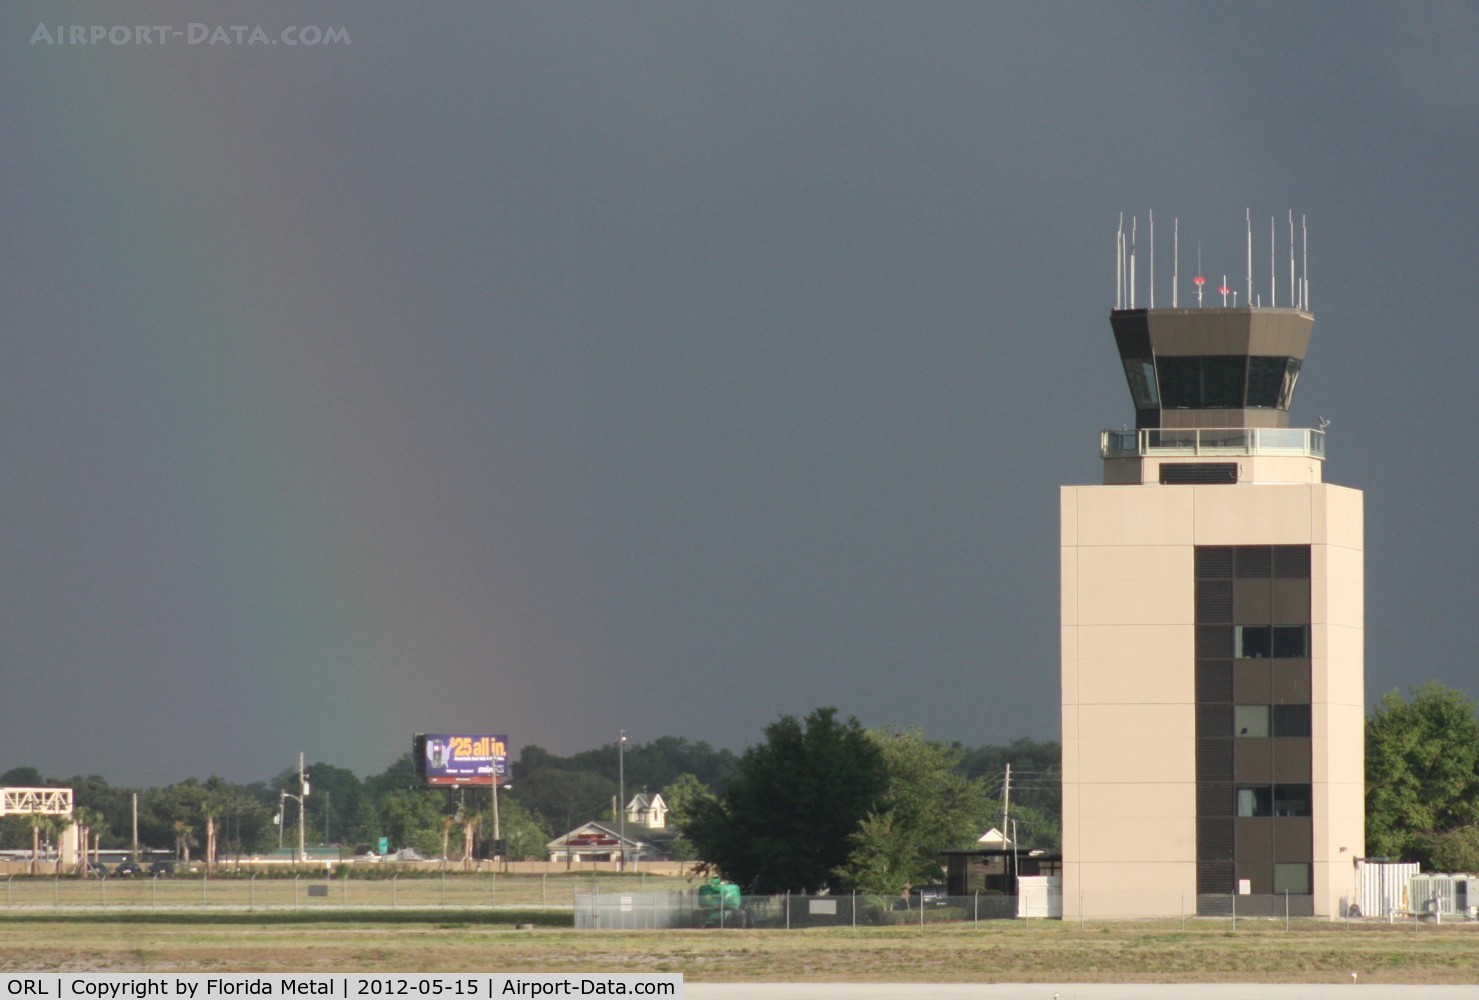 Executive Airport (ORL) - Orlando Executive after a thunderstorm with rainbow